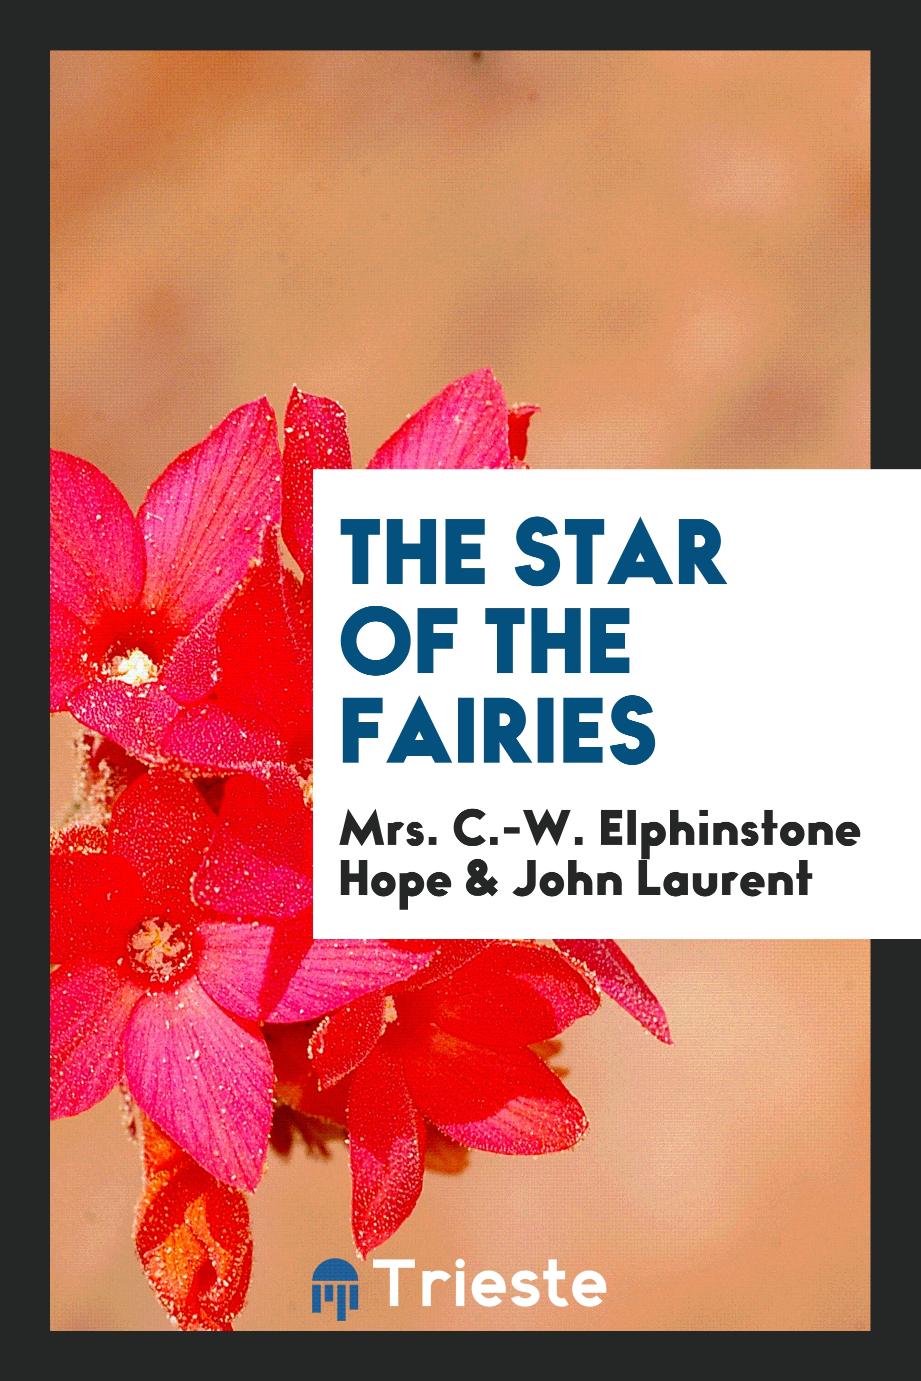 The Star of the Fairies